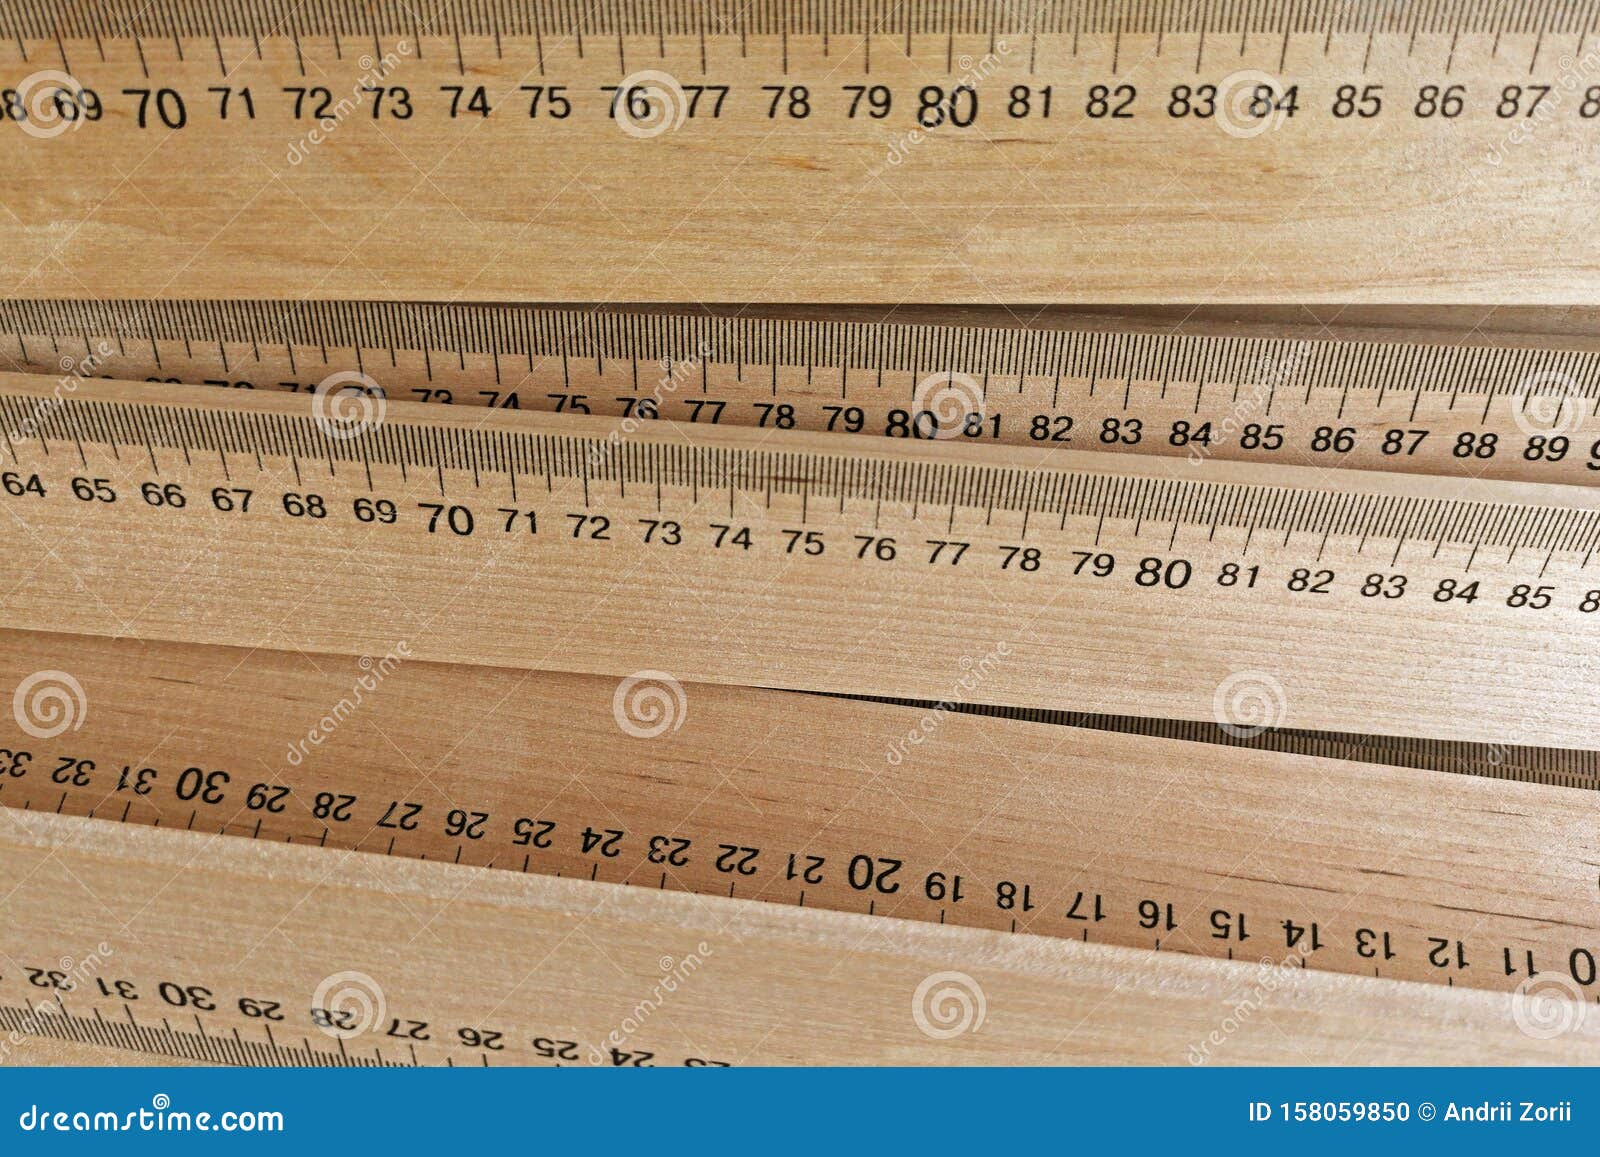 0.75 inches on a ruler